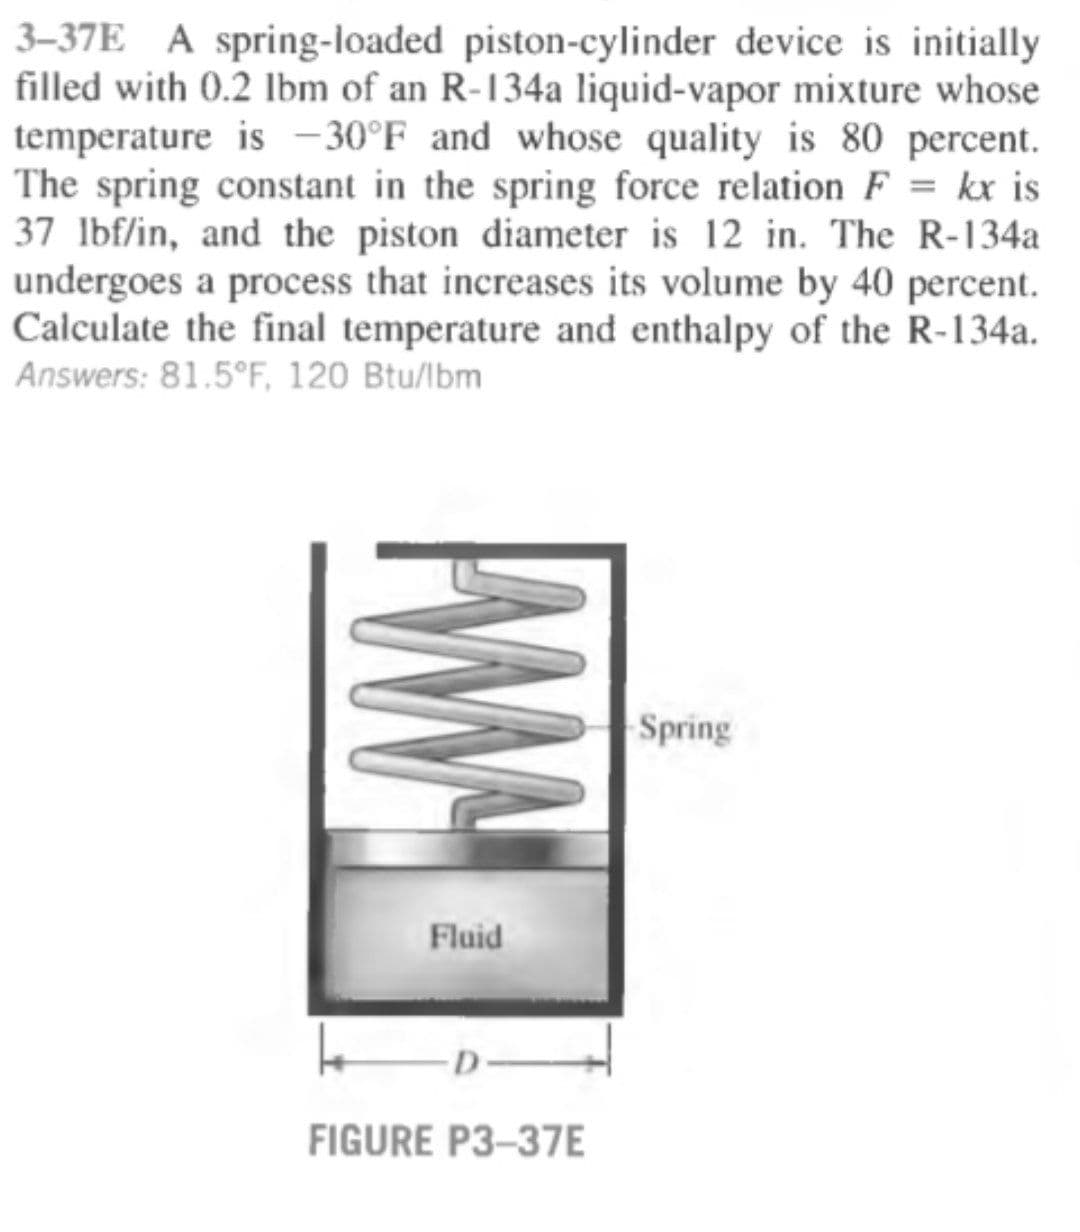 3–37E A spring-loaded piston-cylinder device is initially
filled with 0.2 Ibm of an R-134a liquid-vapor mixture whose
temperature is -30°F and whose quality is 80 percent.
The spring constant in the spring force relation F = kx is
37 lbf/in, and the piston diameter is 12 in. The R-134a
undergoes a process that increases its volume by 40 percent.
Calculate the final temperature and enthalpy of the R-134a.
Answers: 81.5°F, 120 Btu/lbm
%3D
Spring
Fluid
D-
FIGURE P3-37E
